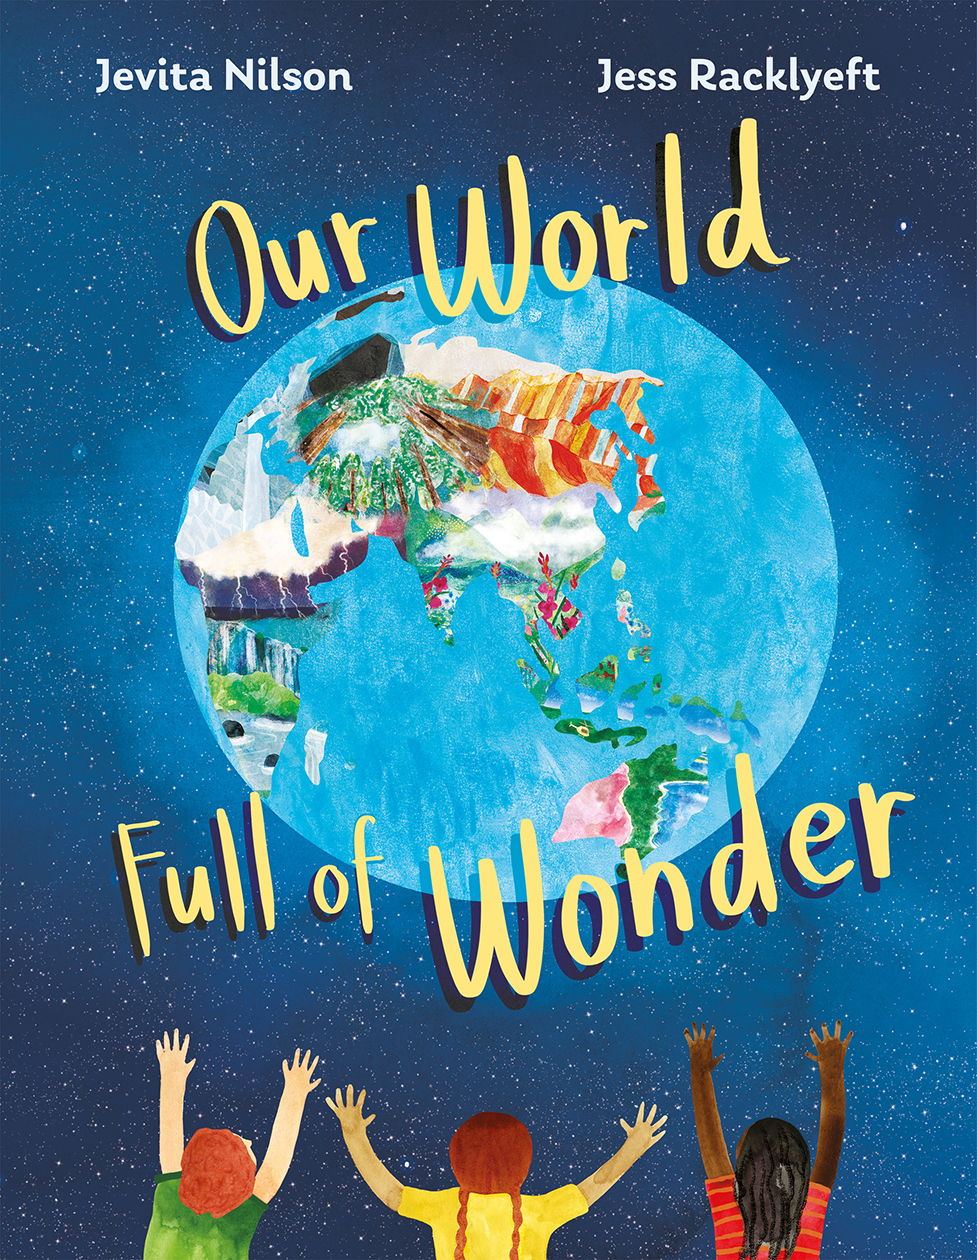 Cover of 'Our World Full of Wonders', with an illustration of the Earth in space and three children reaching out towards it.